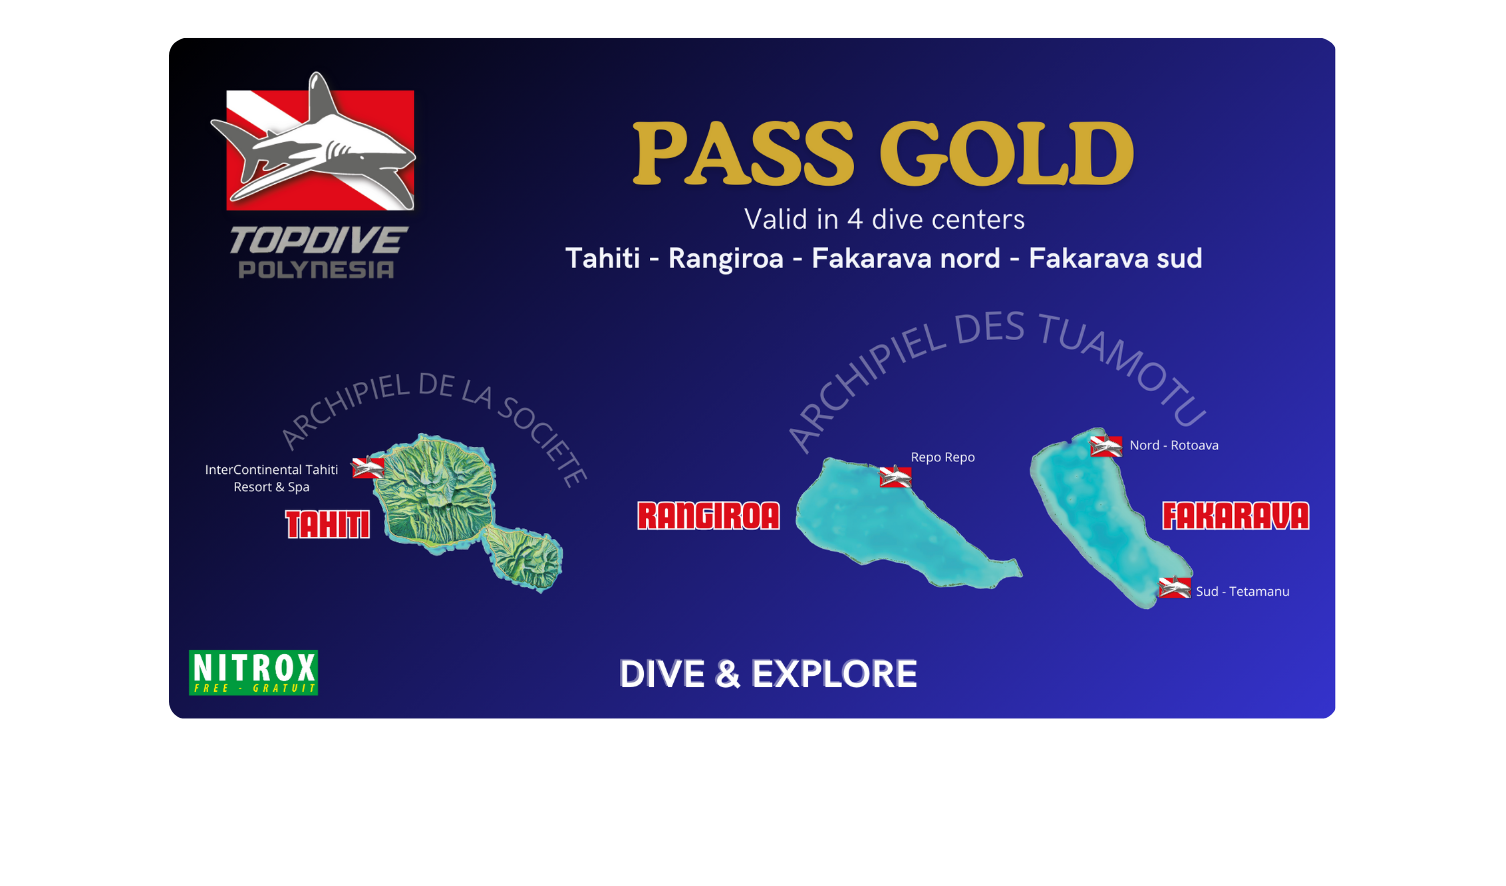 Pass Gold - Topdive